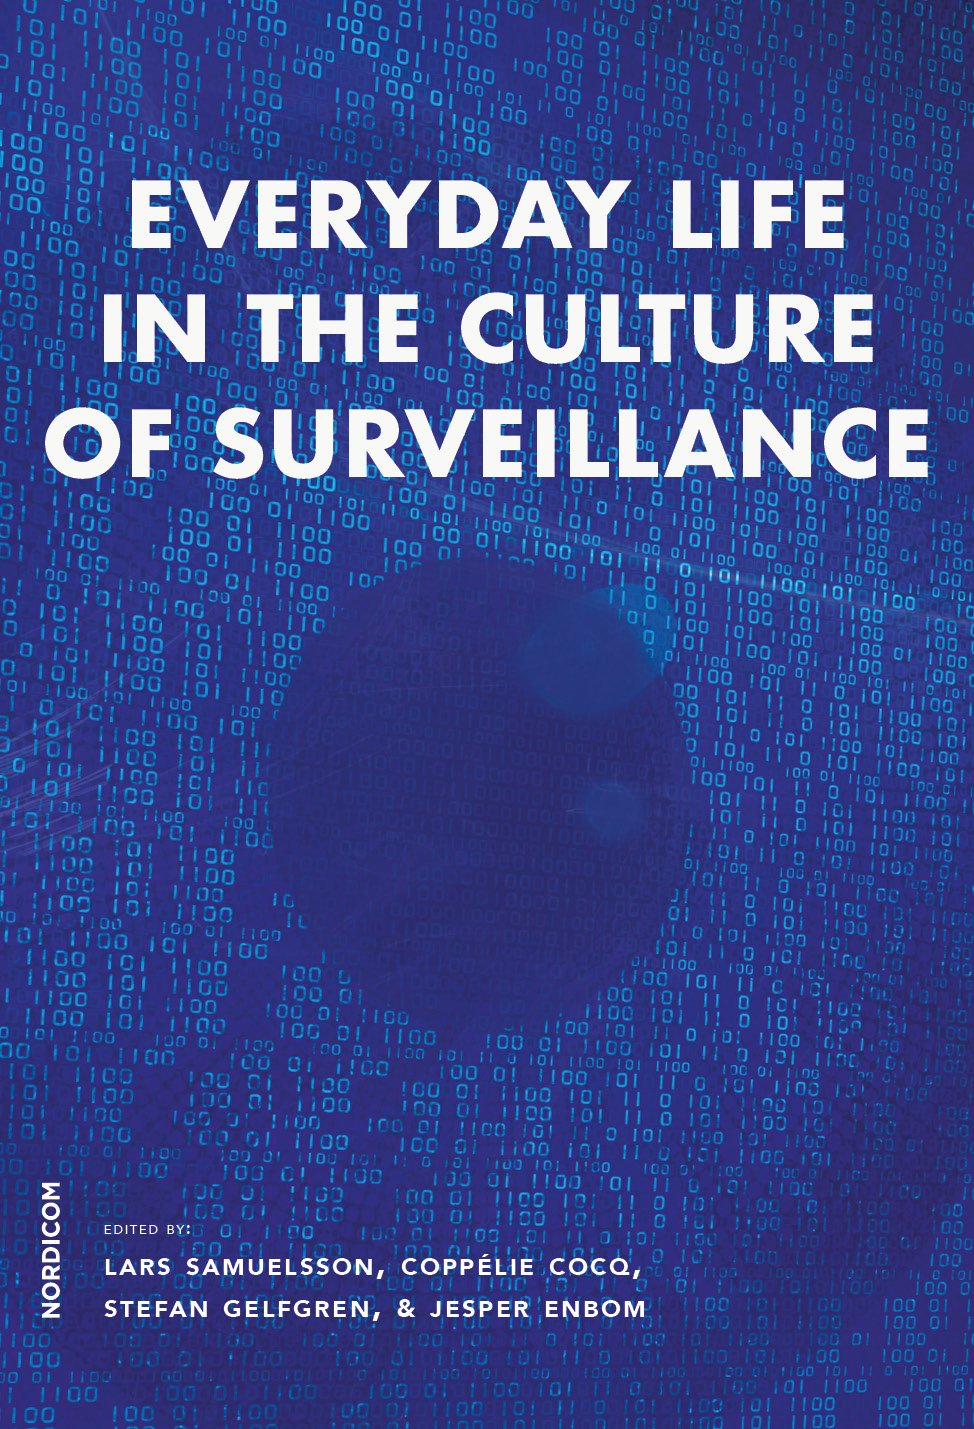 Blue cover to the book Everyday life in the culture of surveillance